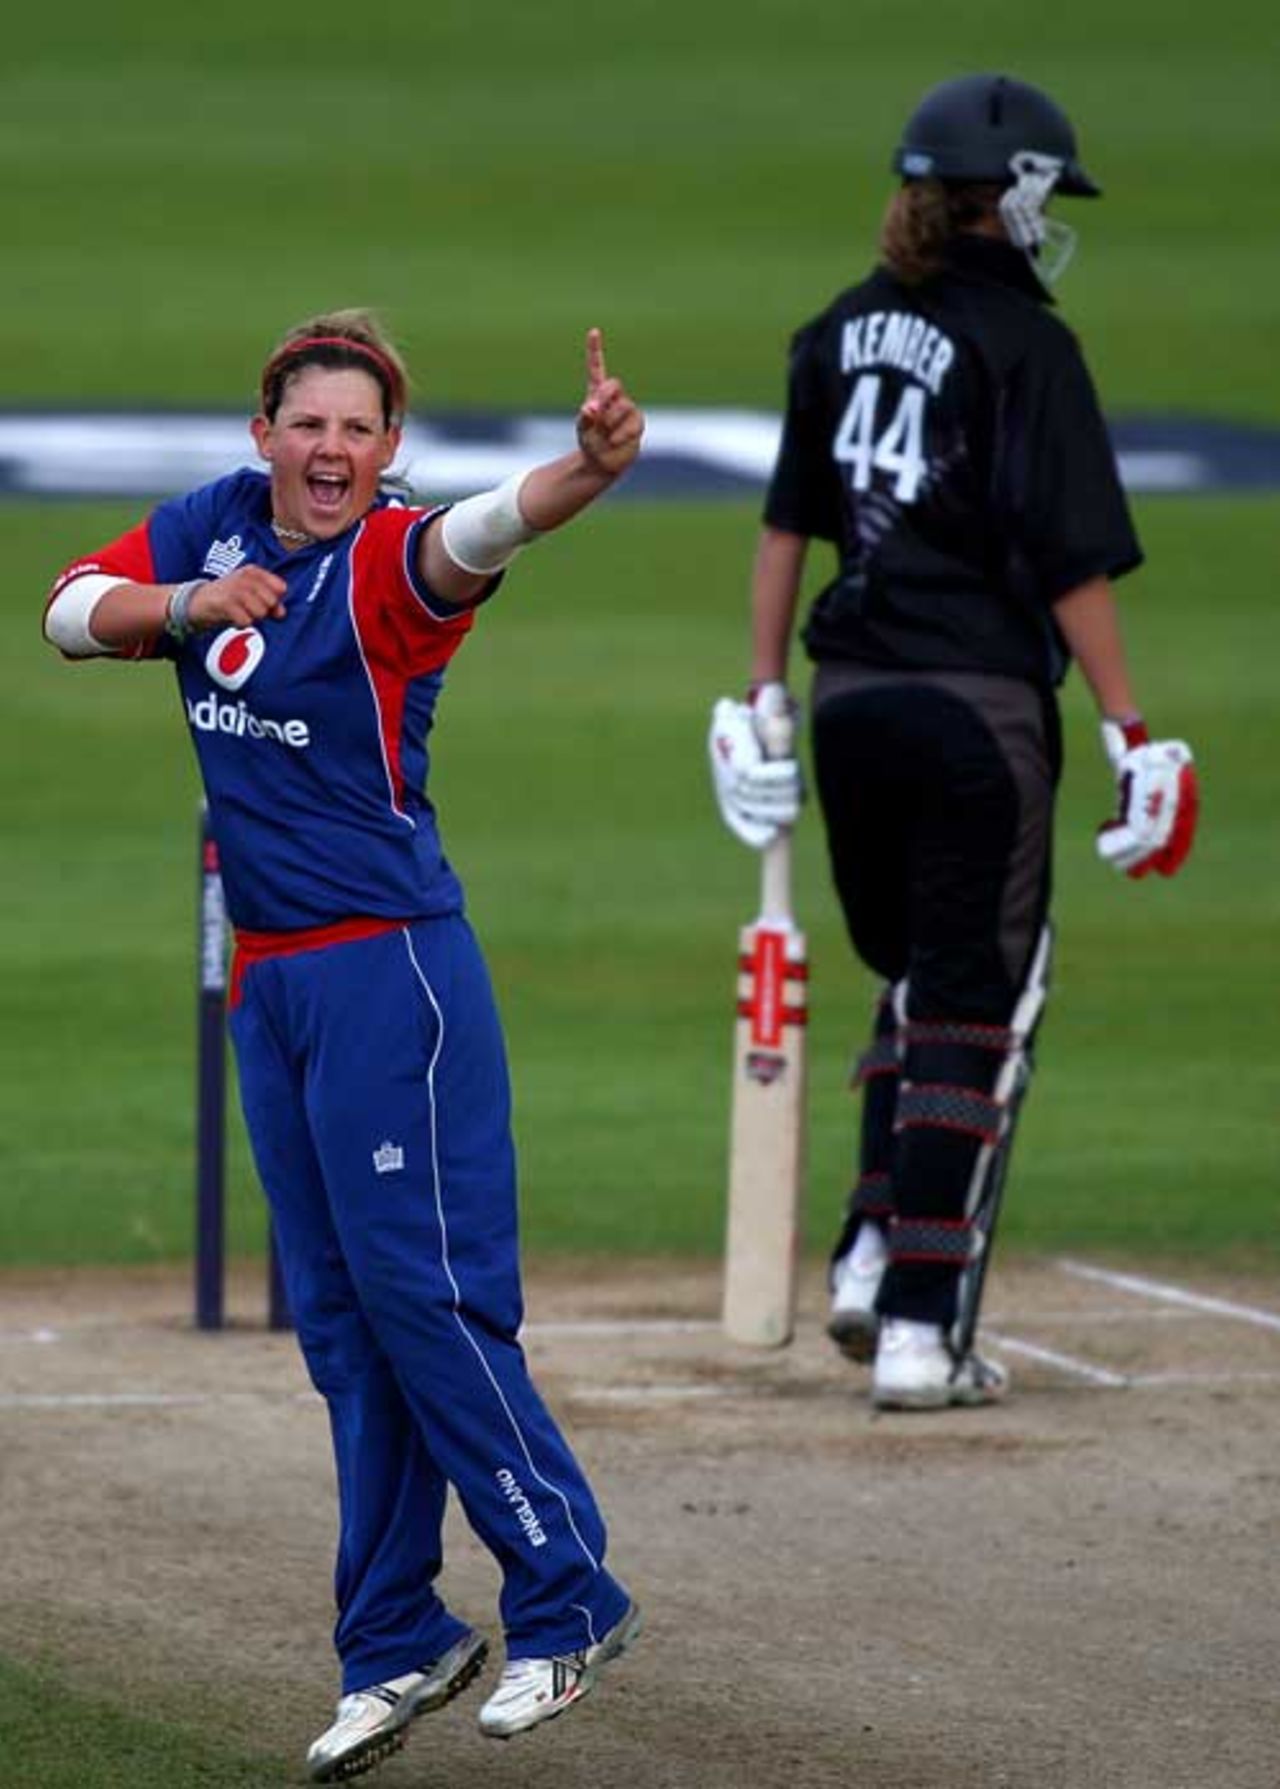 Nicky Shaw has Ros Kember caught behind, England v New Zealand, 1st Women's ODI, Taunton, August 17, 2007